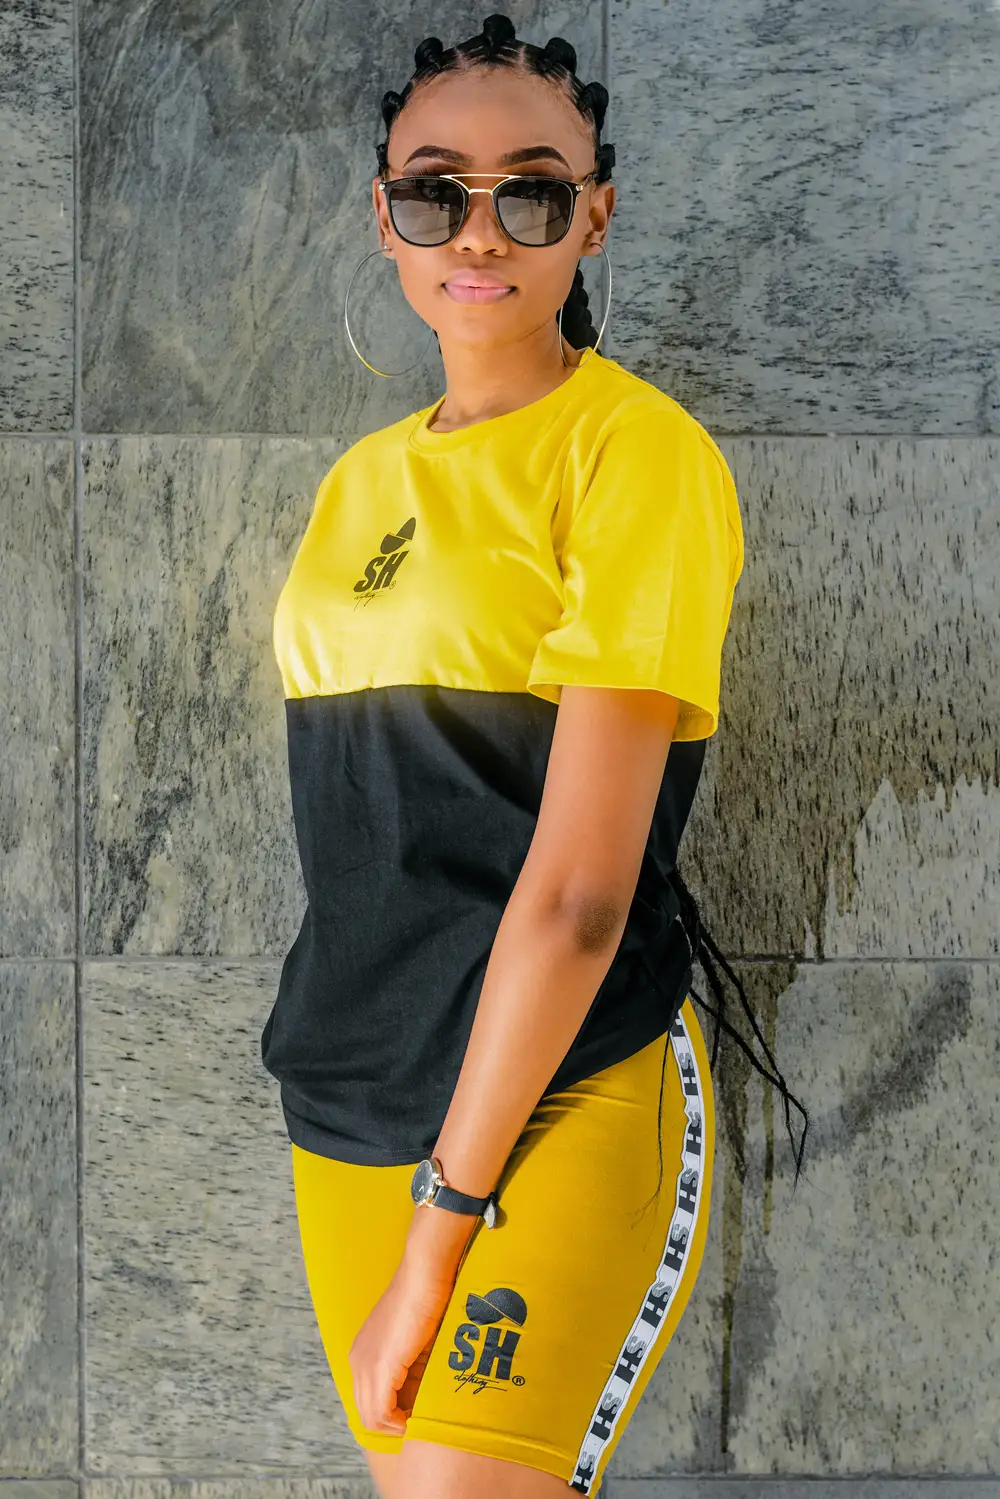 young woman on a yellow and black shirt